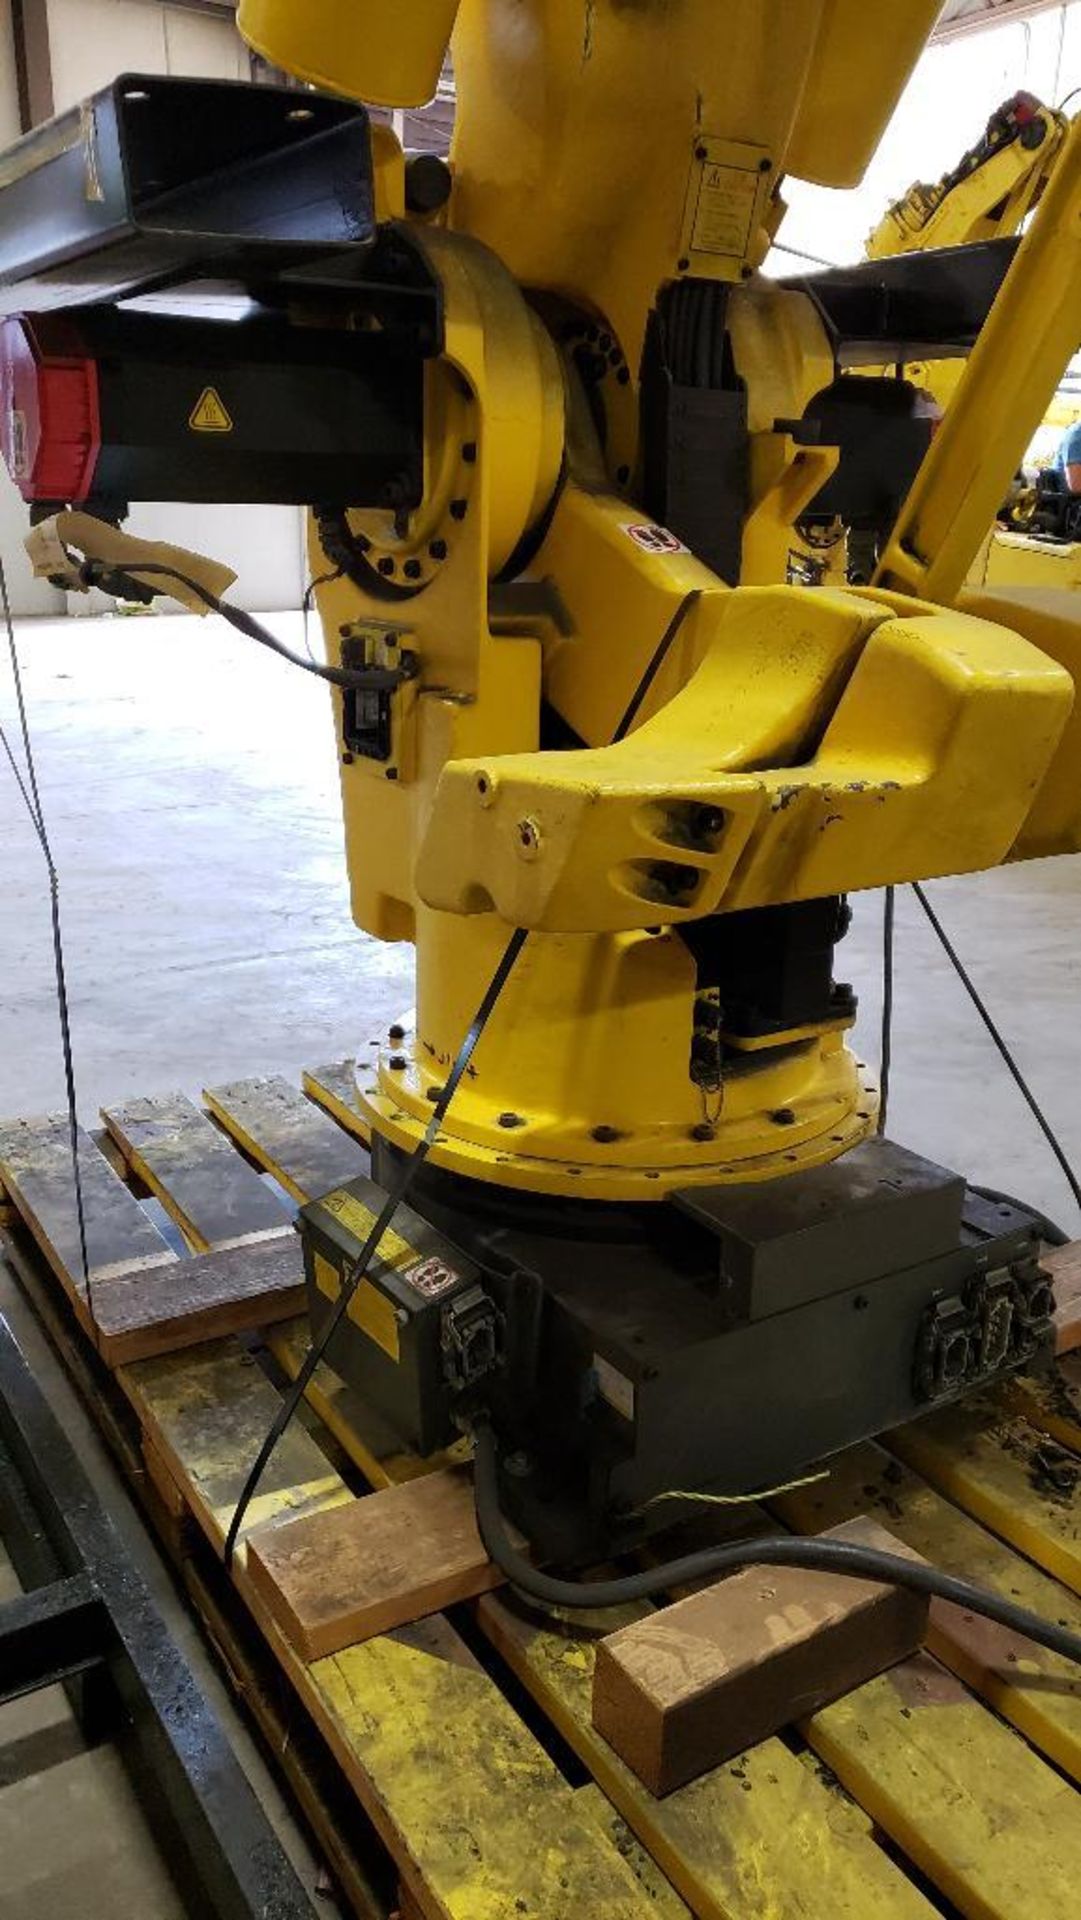 Fanuc S-420iW robot 6-axis arm. - Image 8 of 9